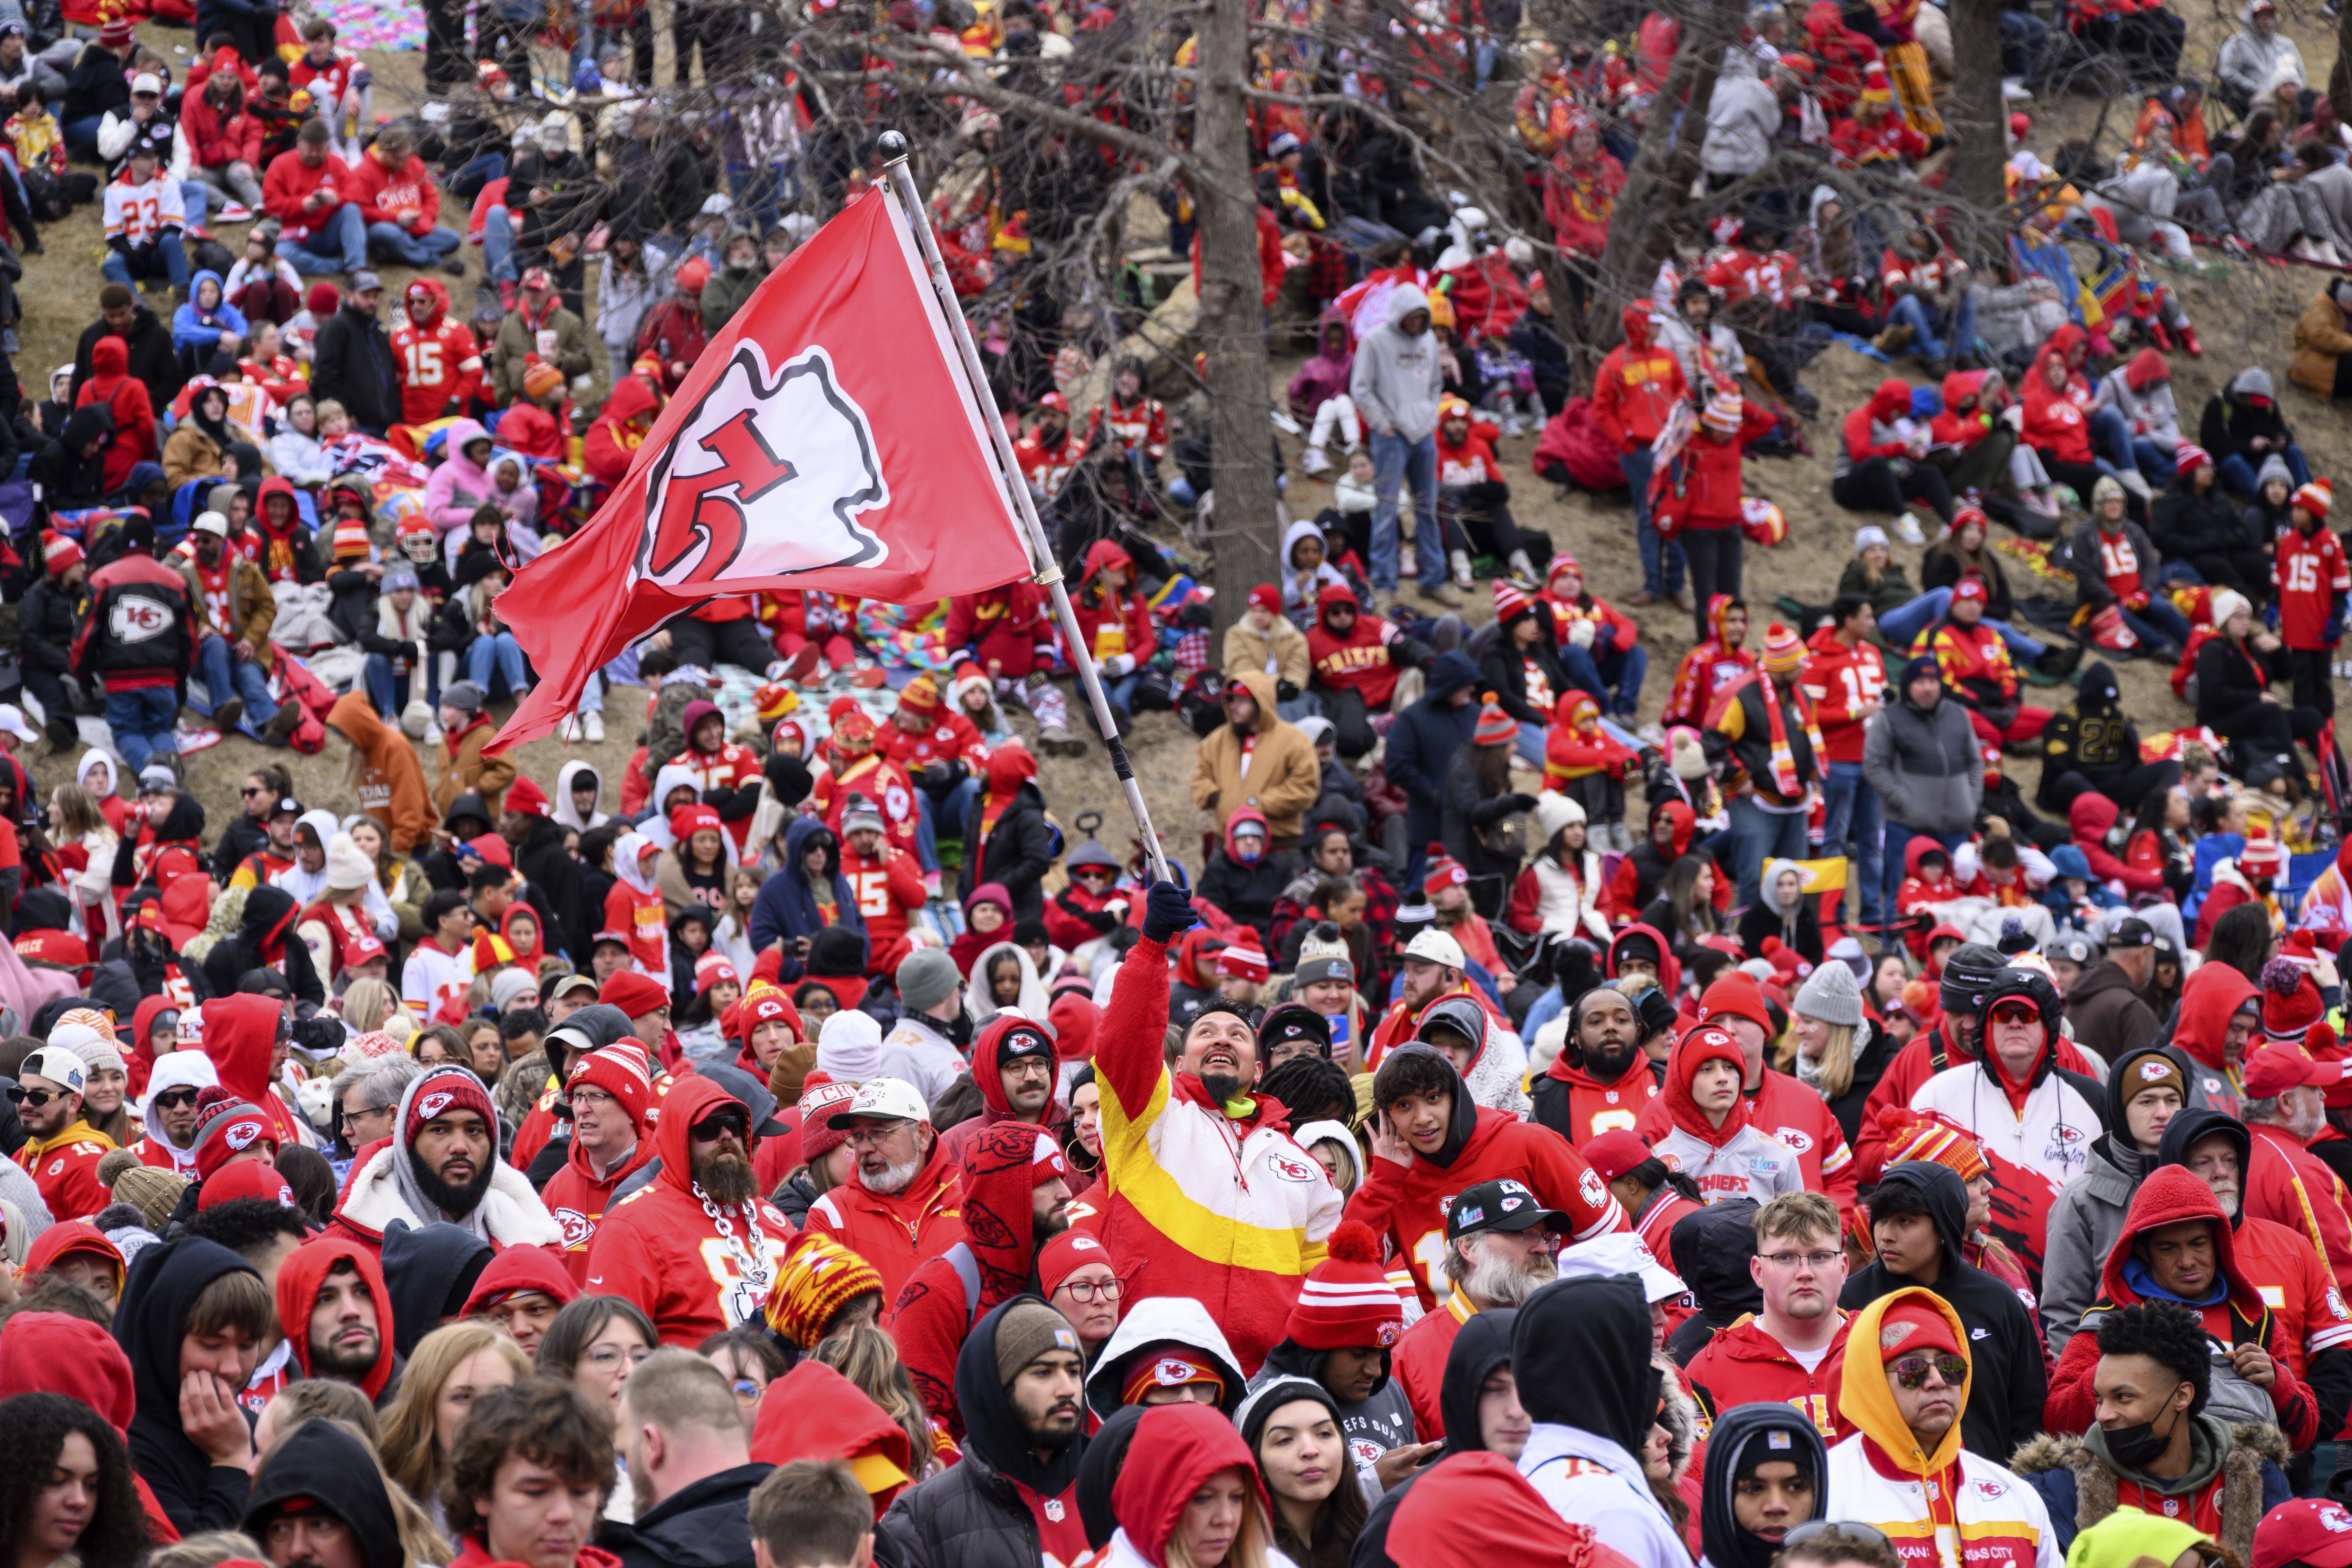 Worth the wait: At 4 a.m., fans started lining up for the Chiefs